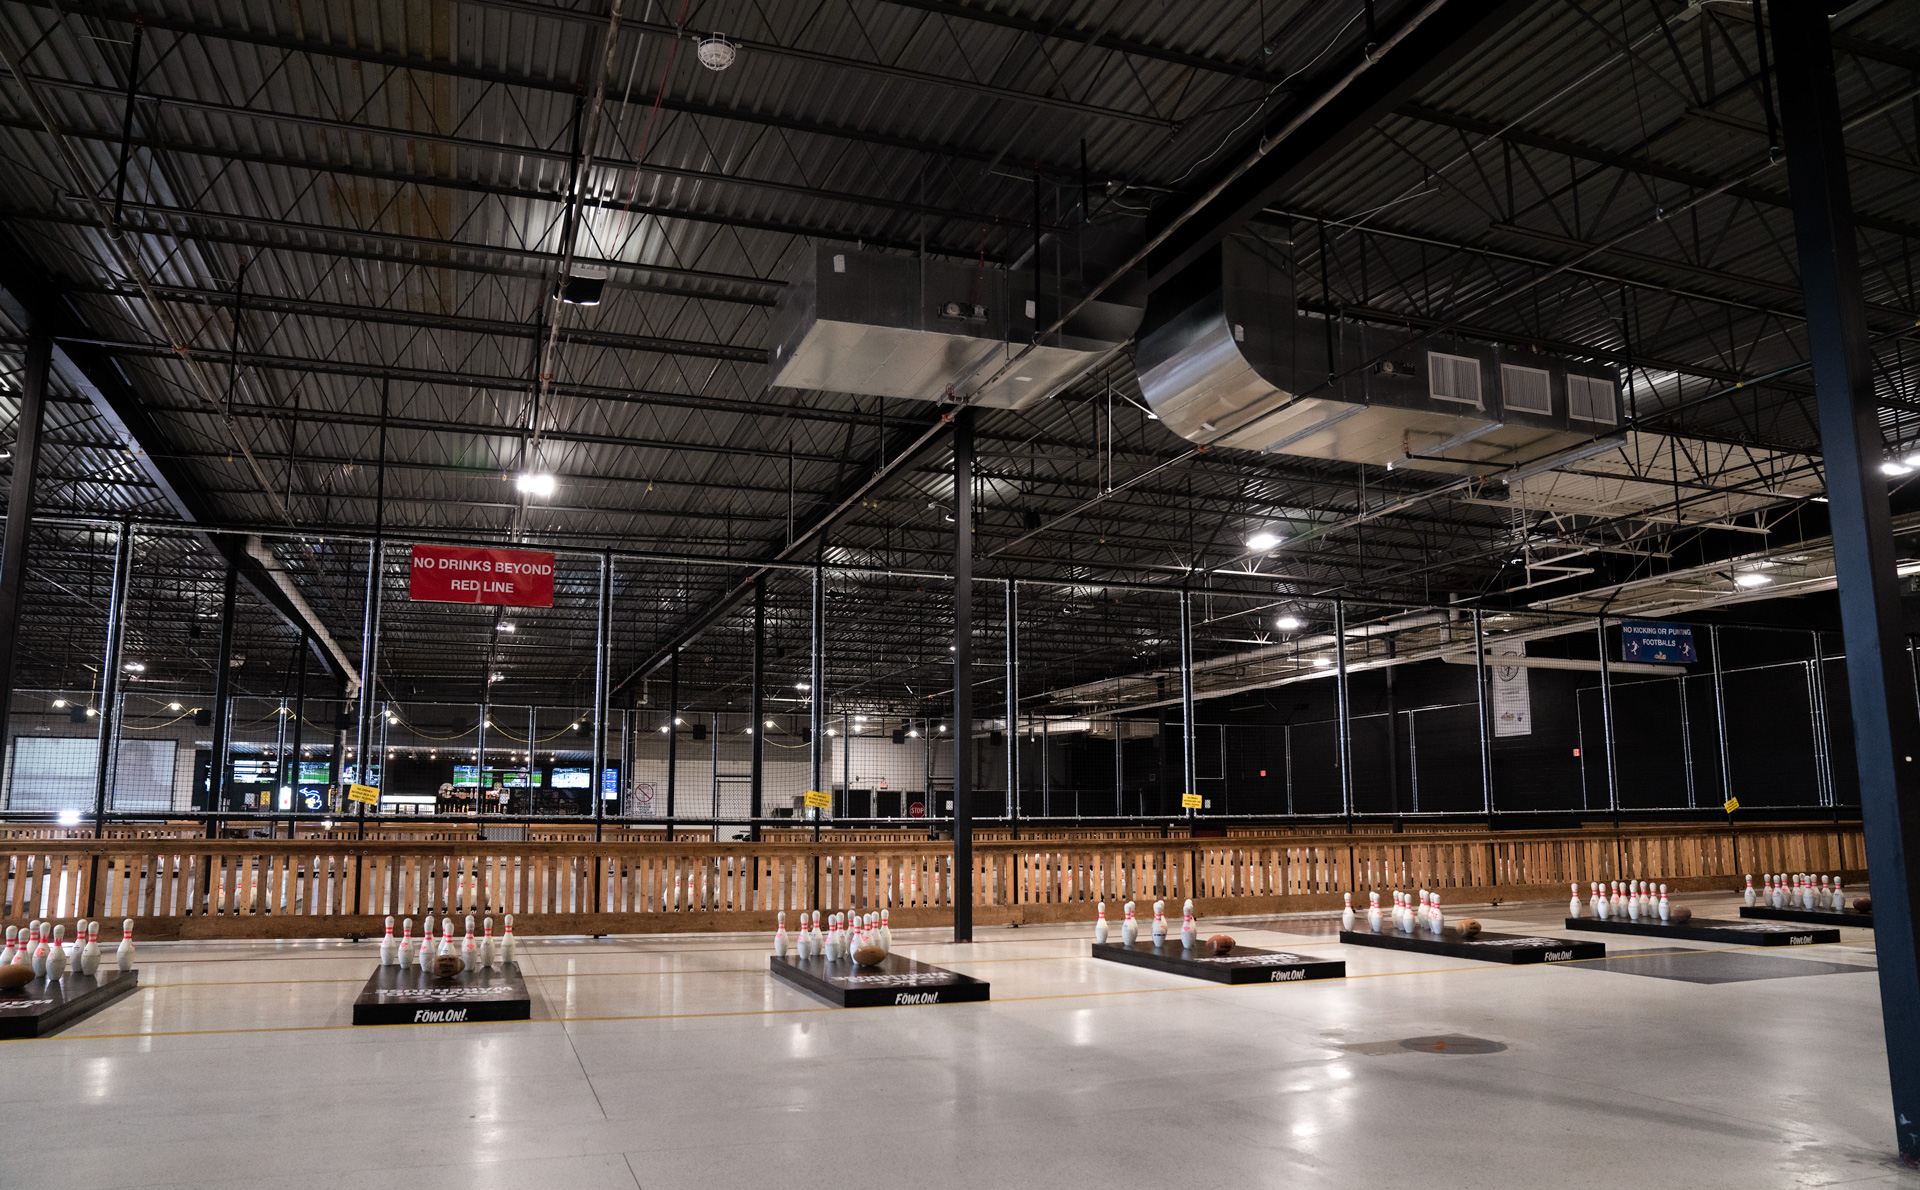 Wide shot of all the lanes set up at the Fowling Warehouse